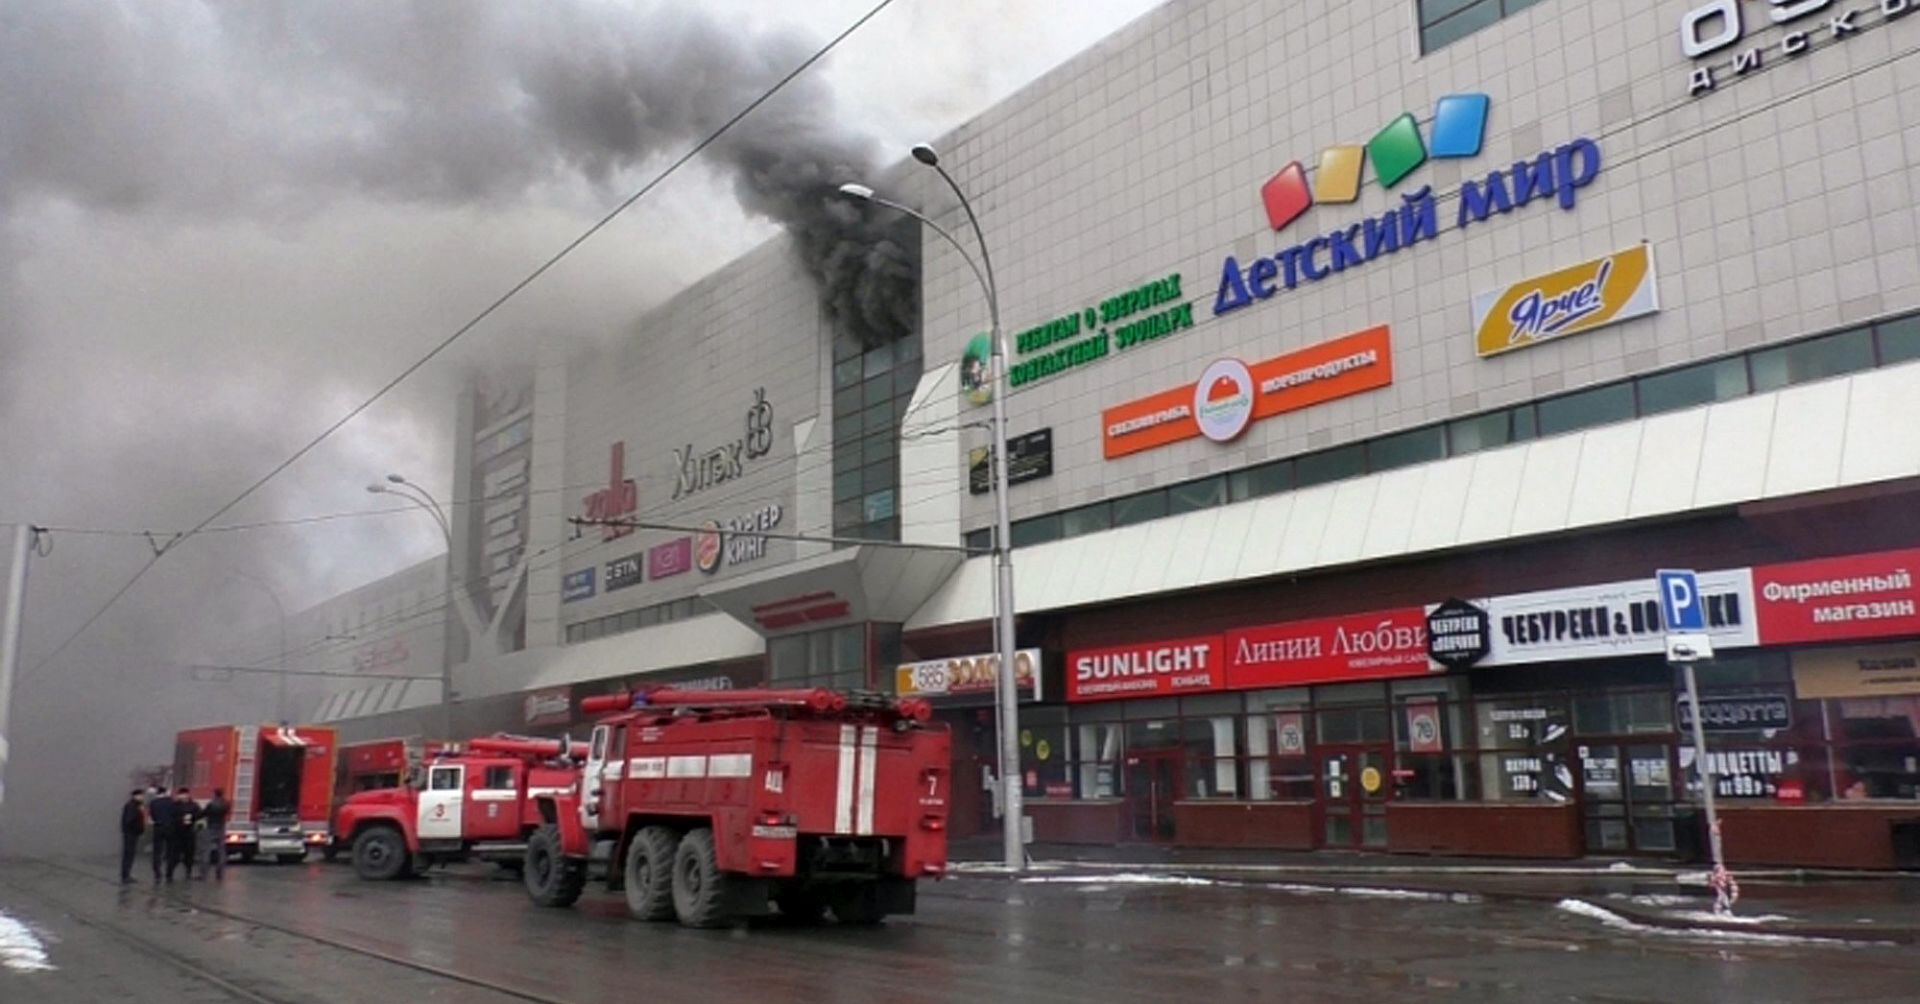 epa06628913 A handout photo made available by the Russian Emergencies Ministry shows fire fighters climbing up onto a top floor of a shopping mall Zimnyaya Vishnya on fire in the Siberian city of Kemerovo, Russia, 25 March 2018. According to reports, the fire occurred on the third floor at the children playing ground in the shopping center leaving at least four children dead.  EPA/EMERGENCIES MINISTRY HANDOUT  HANDOUT EDITORIAL USE ONLY/NO SALES/NO ARCHIVES